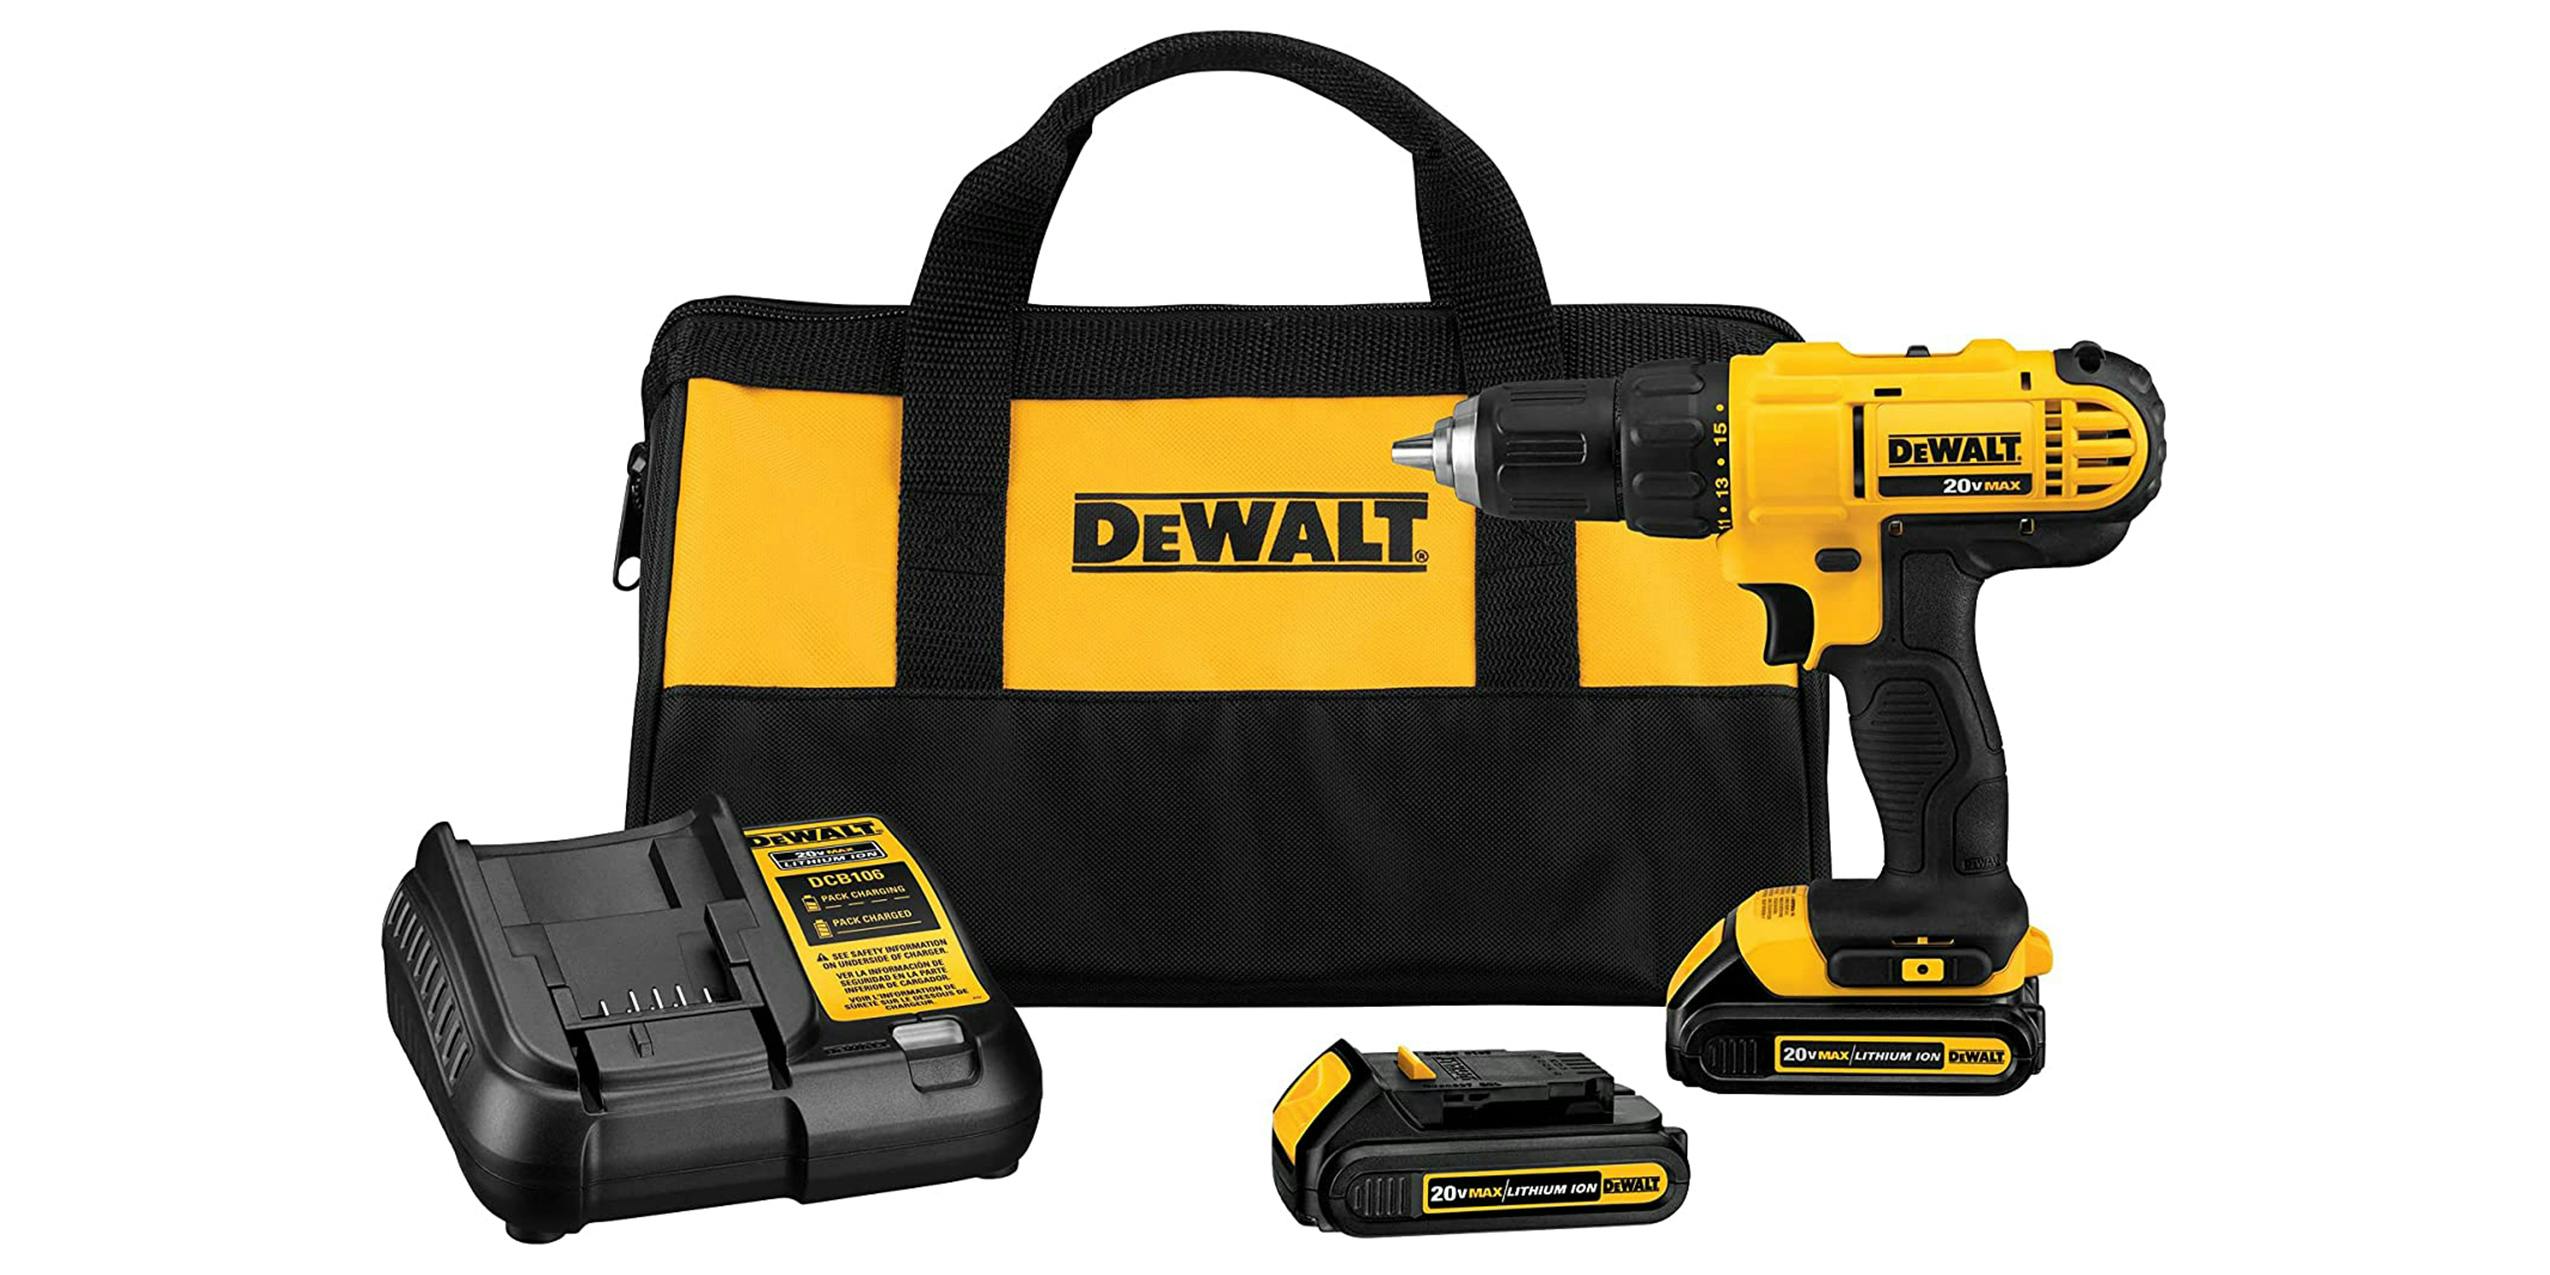 The Dewalt Drill and Driver kit along with its carrying case is a great Christmas gift for dad.